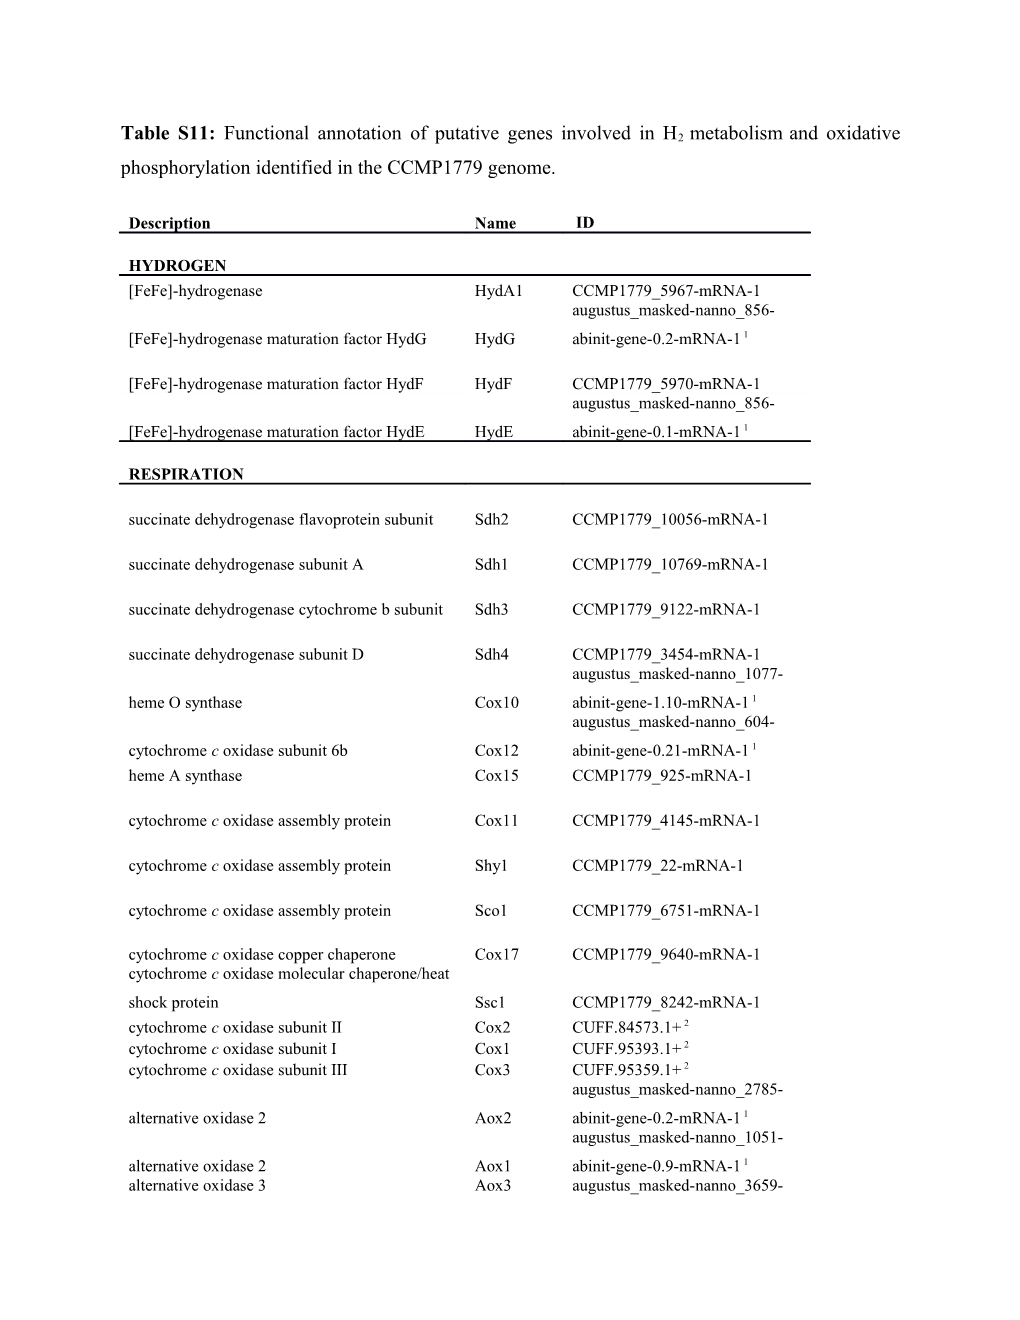 Table S11: Functional Annotation of Putative Genes Involved in H2metabolismand Oxidative